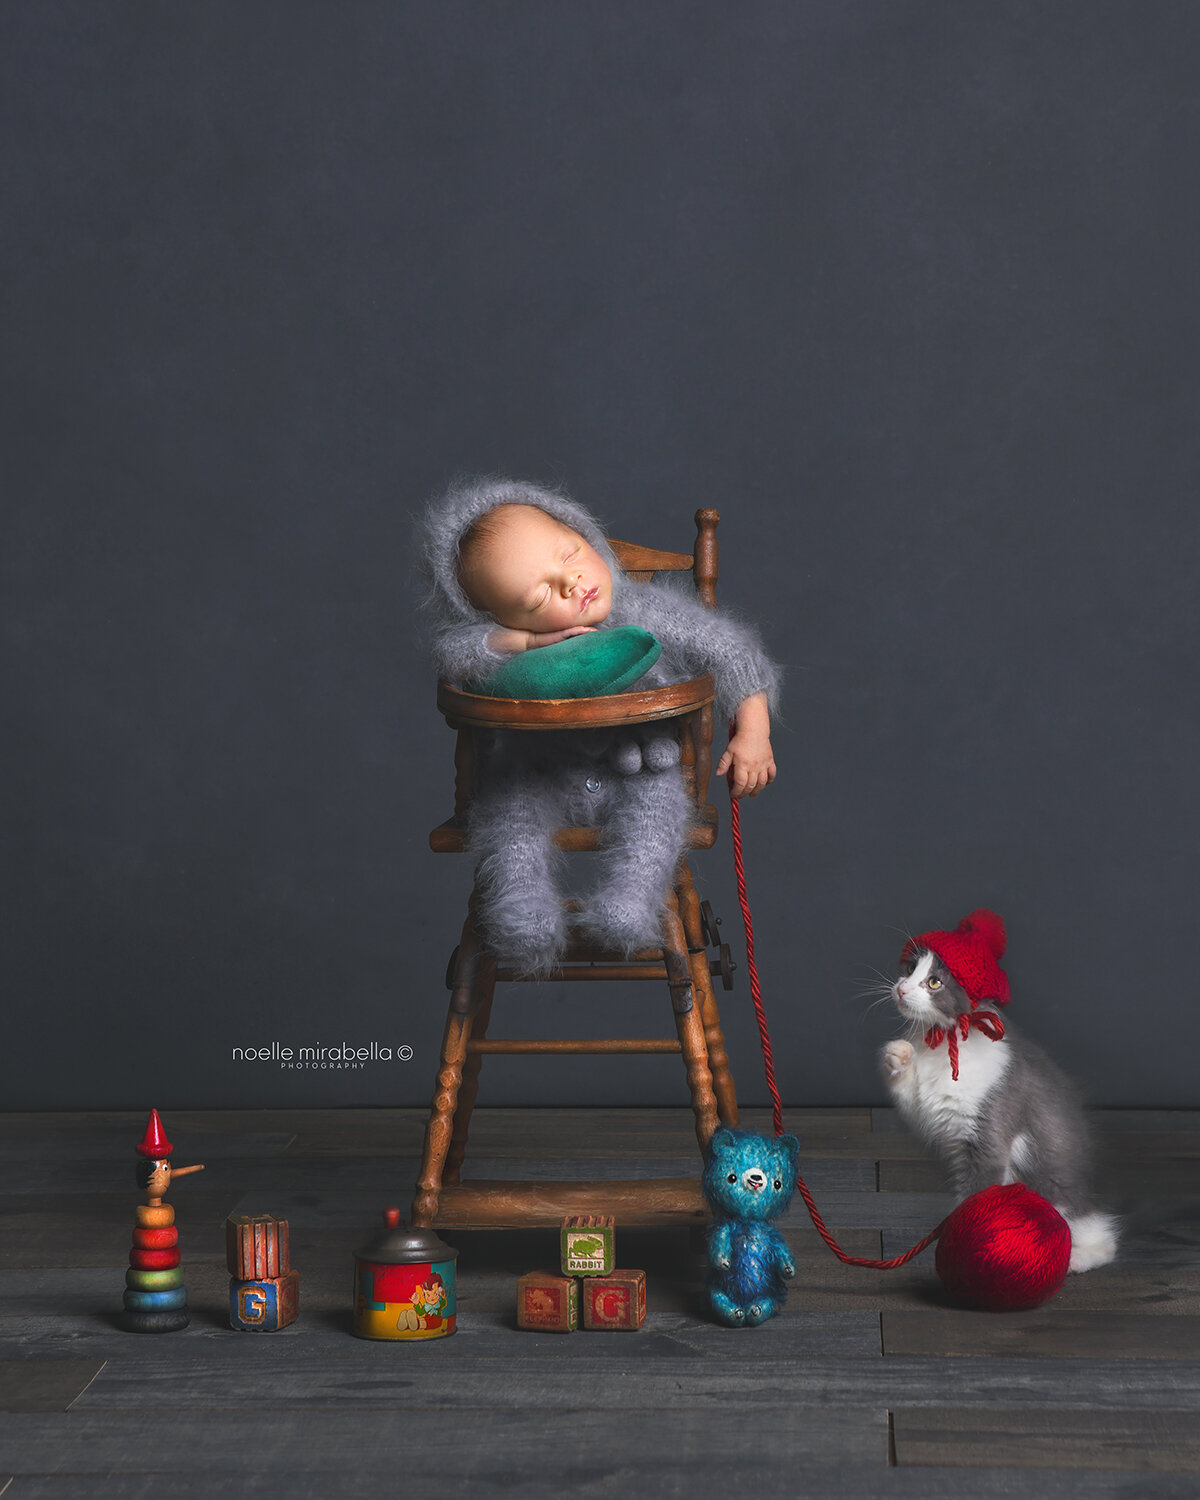 Little newborn sleeping in high chair with baby kitten playing with yarn at his feet.